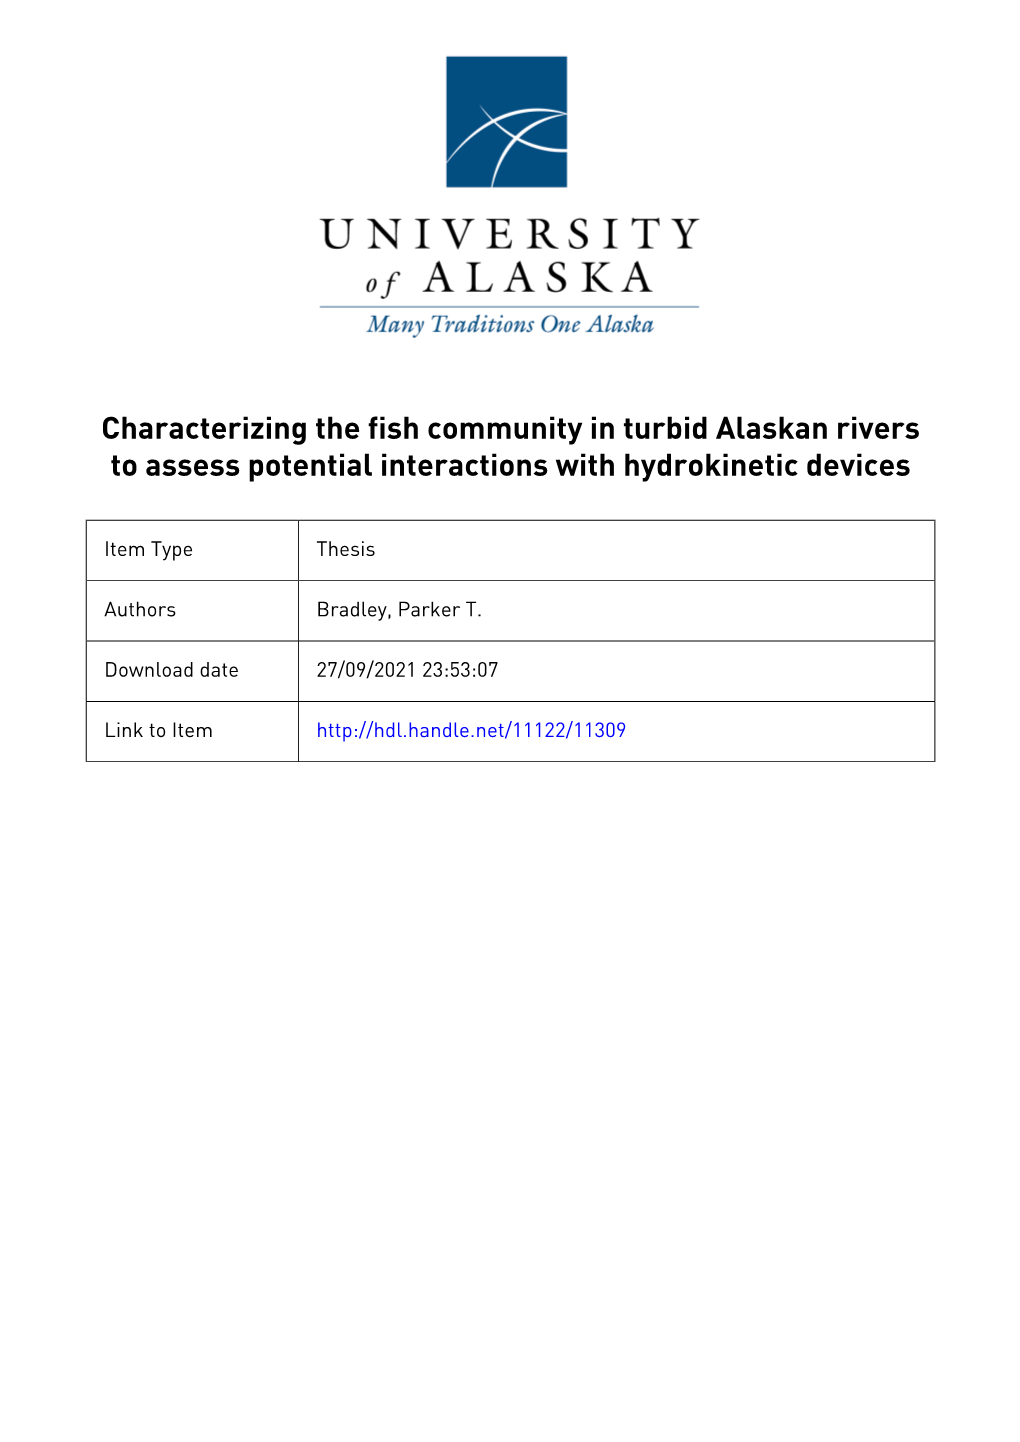 Characterizing the Fish Community in Turbid Alaskan Rivers to Assess Potential Interactions with Hydrokinetic Devices